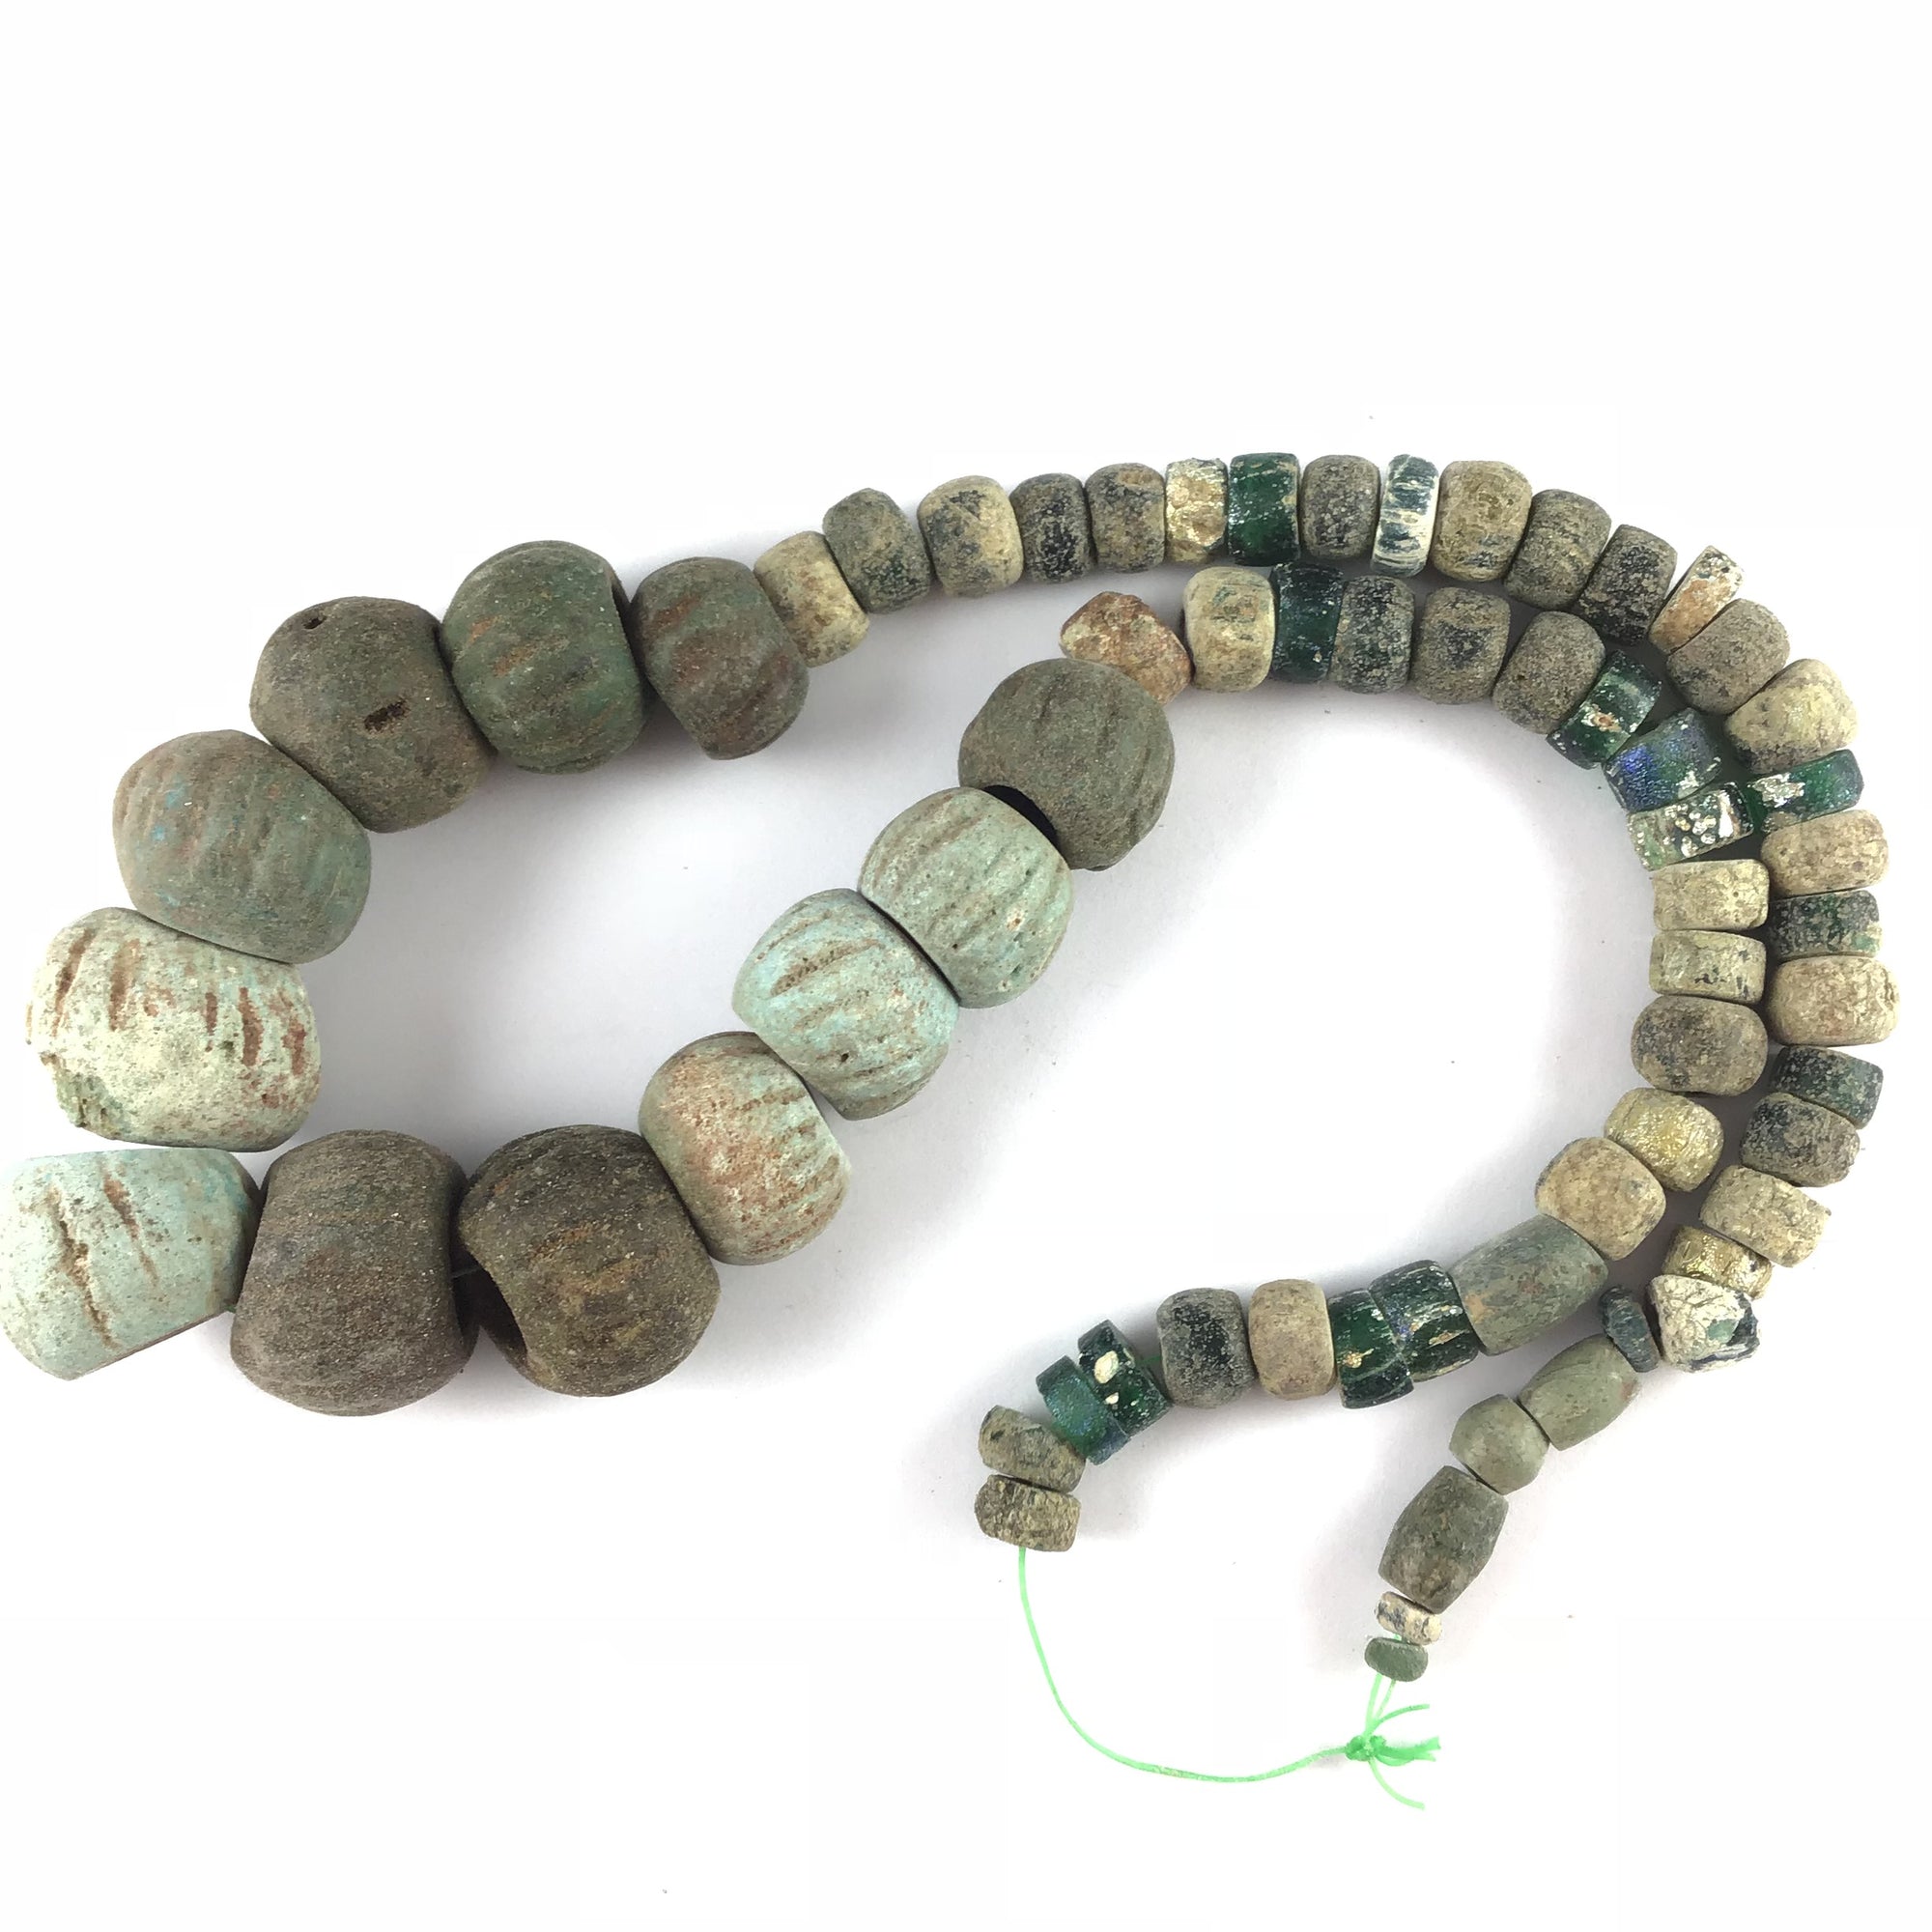 Ancient Egyptian Faience Beads With Mixed Ancient Glass Beads From Egypt And West Africa Rita